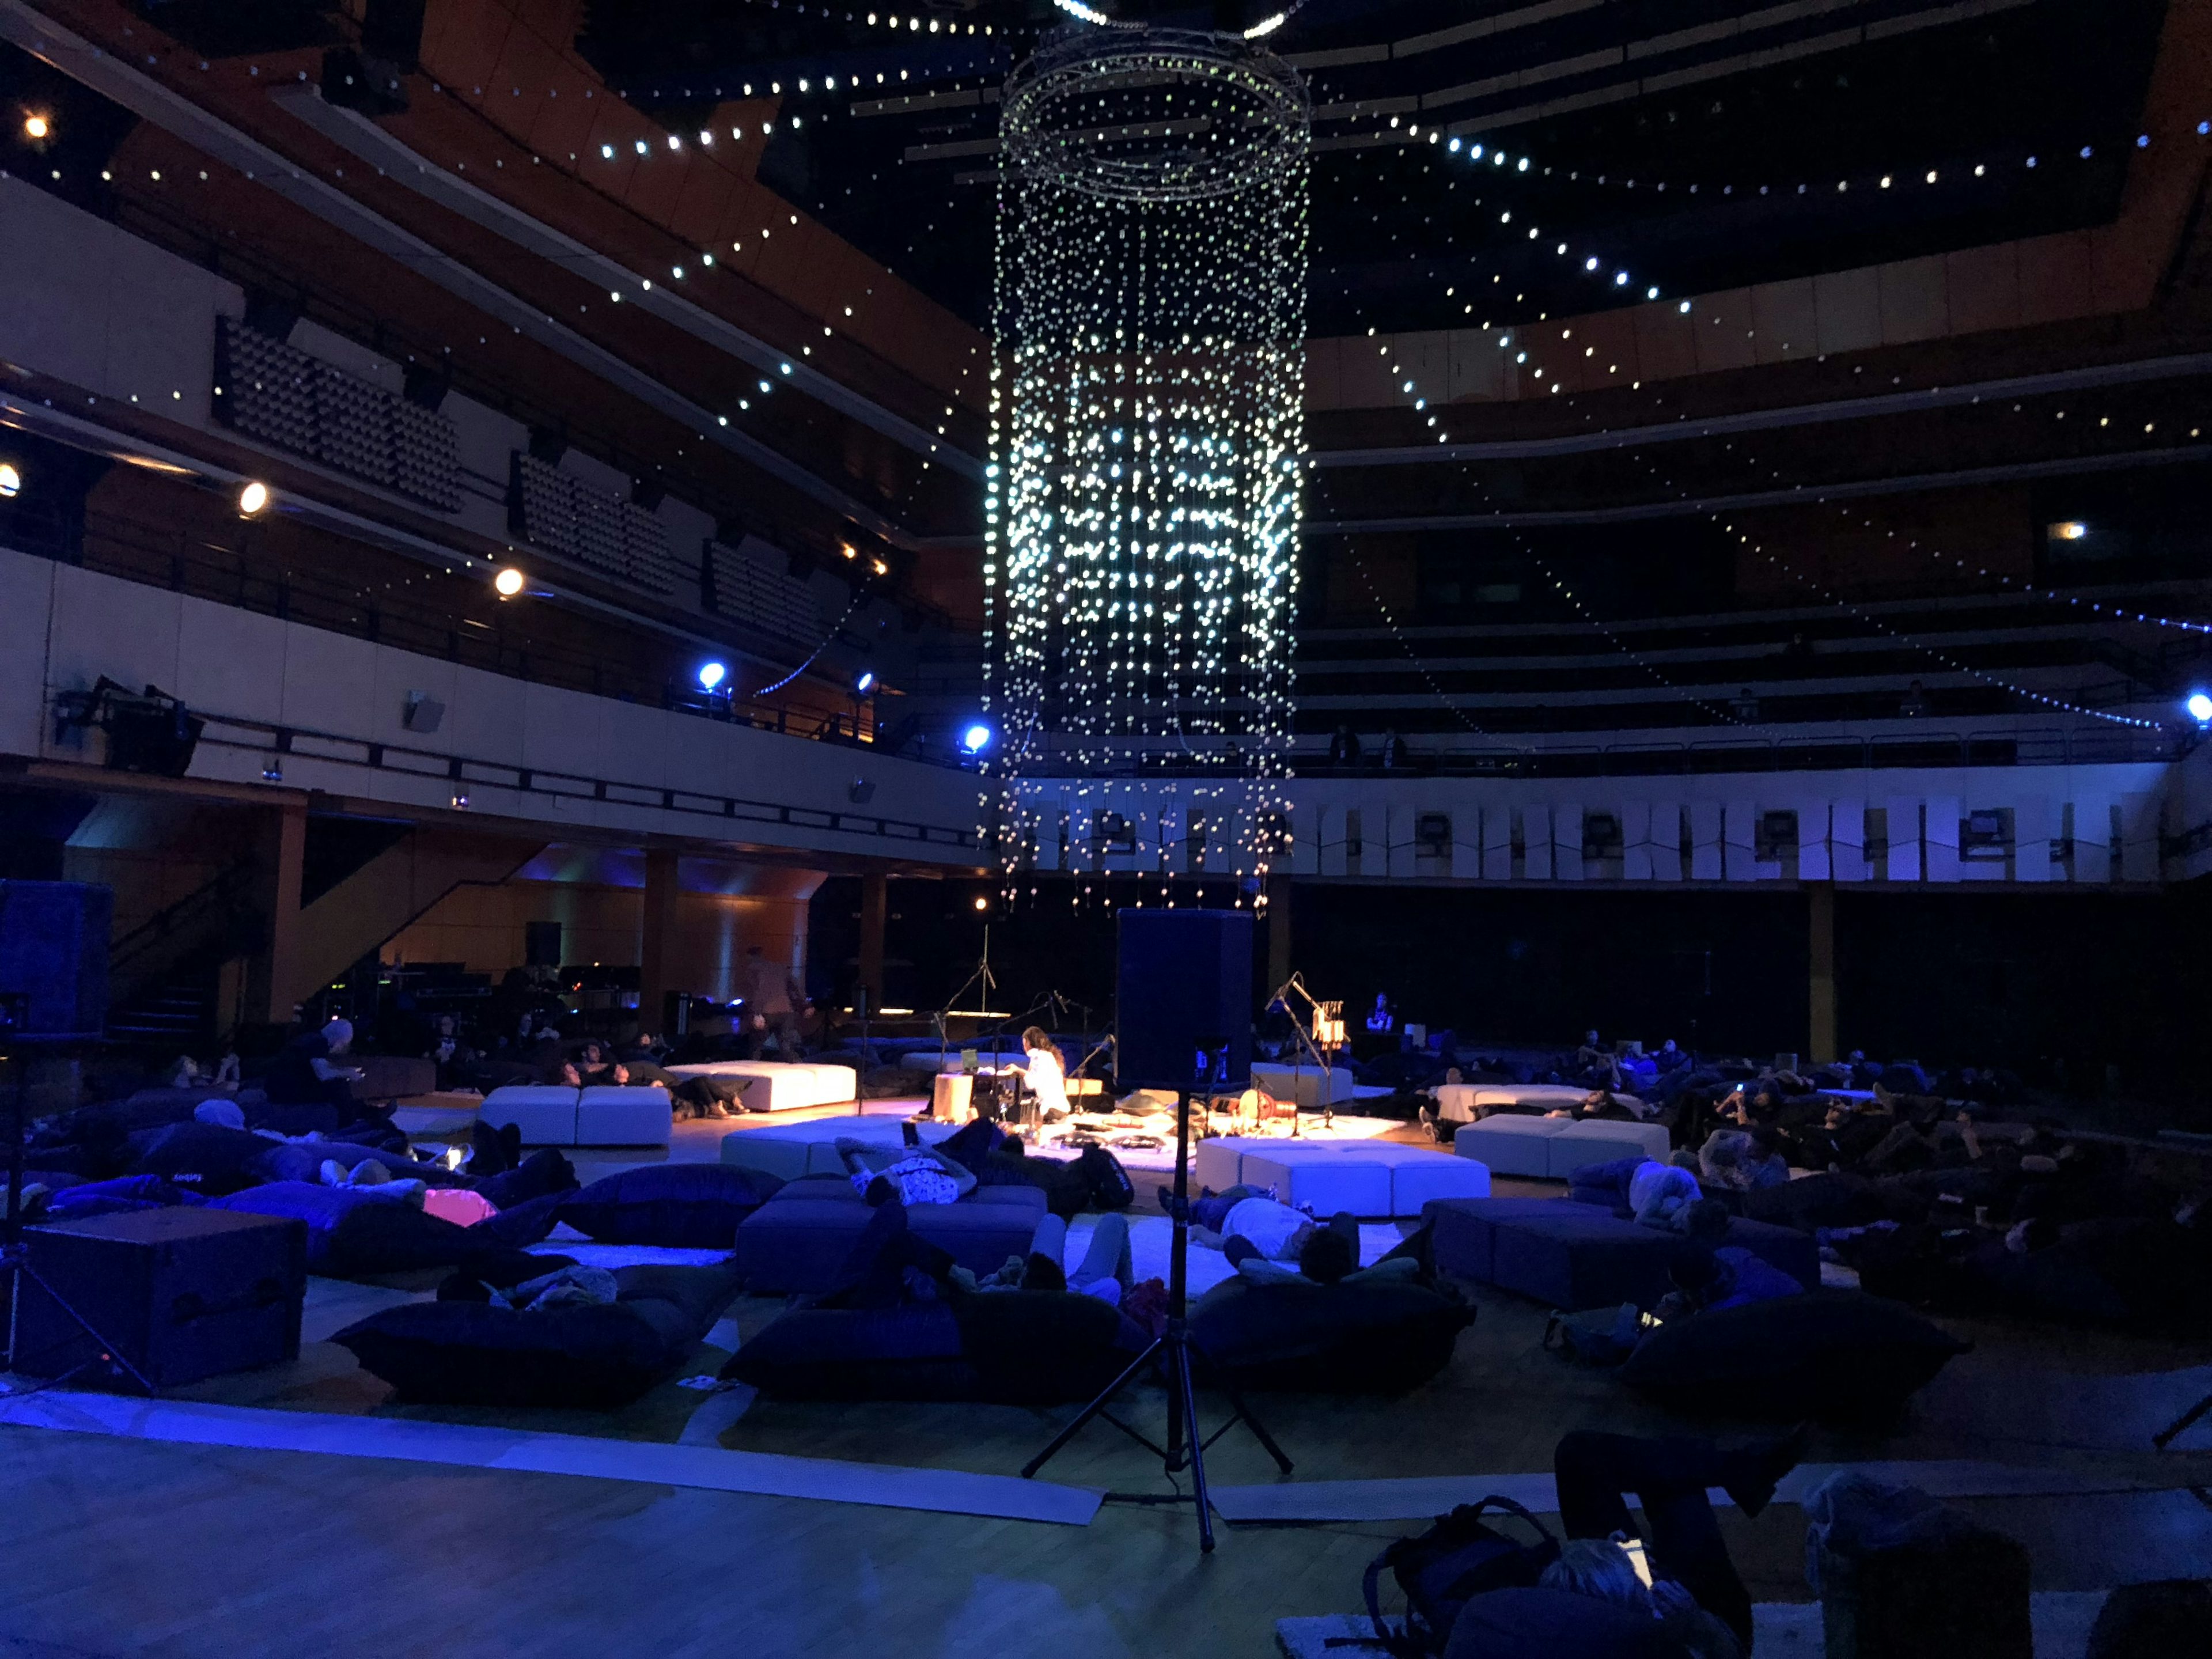 The faithful Ethereans gathered in Prague for DevCon 4